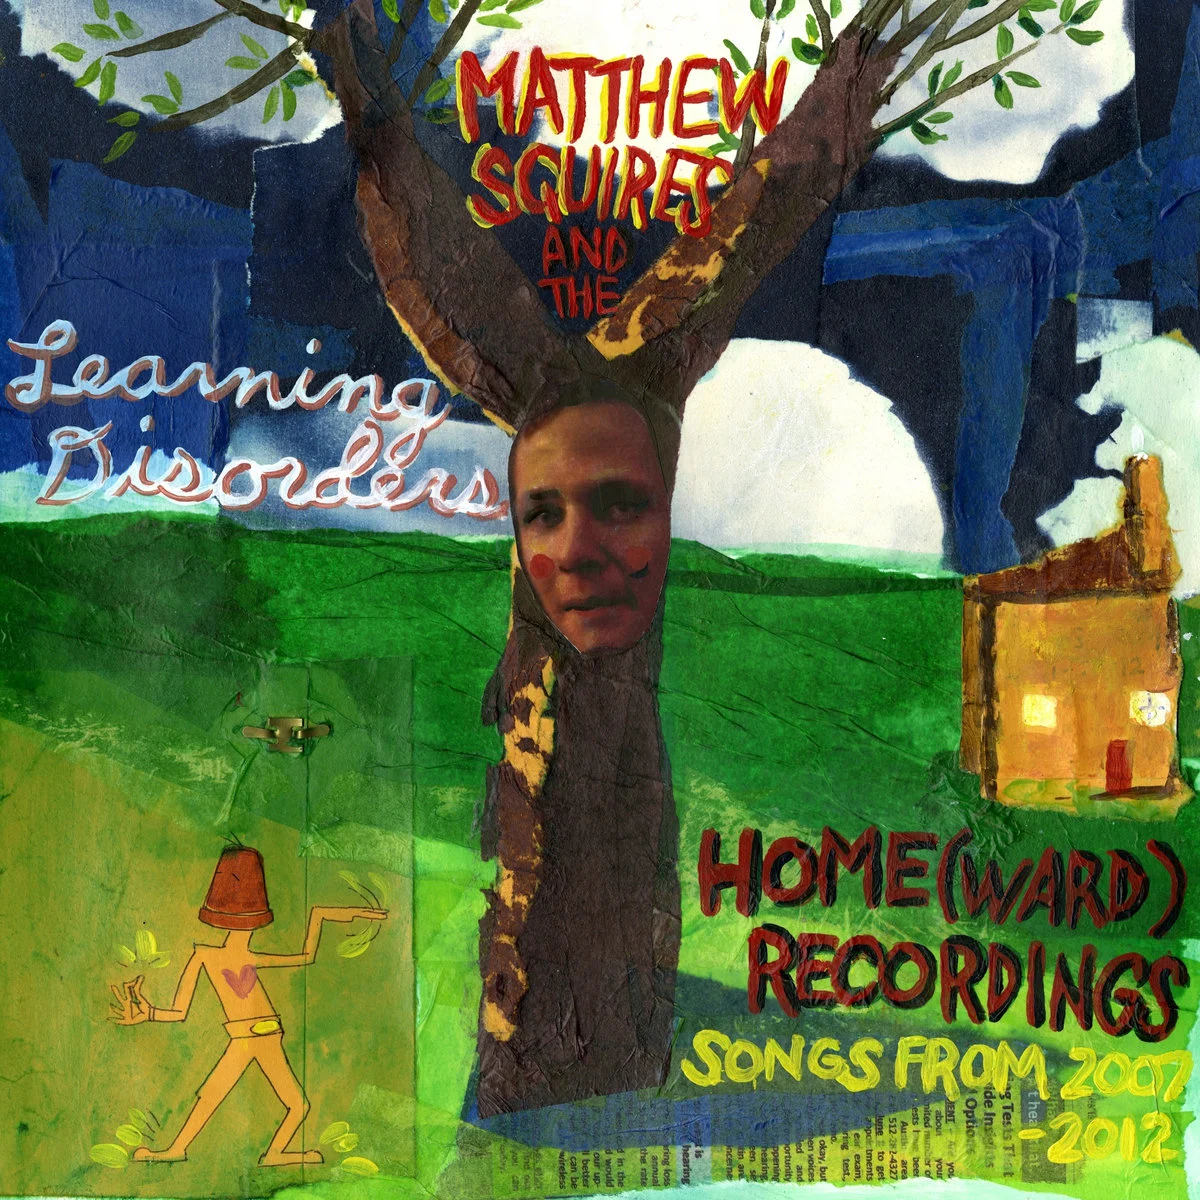  Home​(​ward) Recordings: Songs from 2007 - 2012